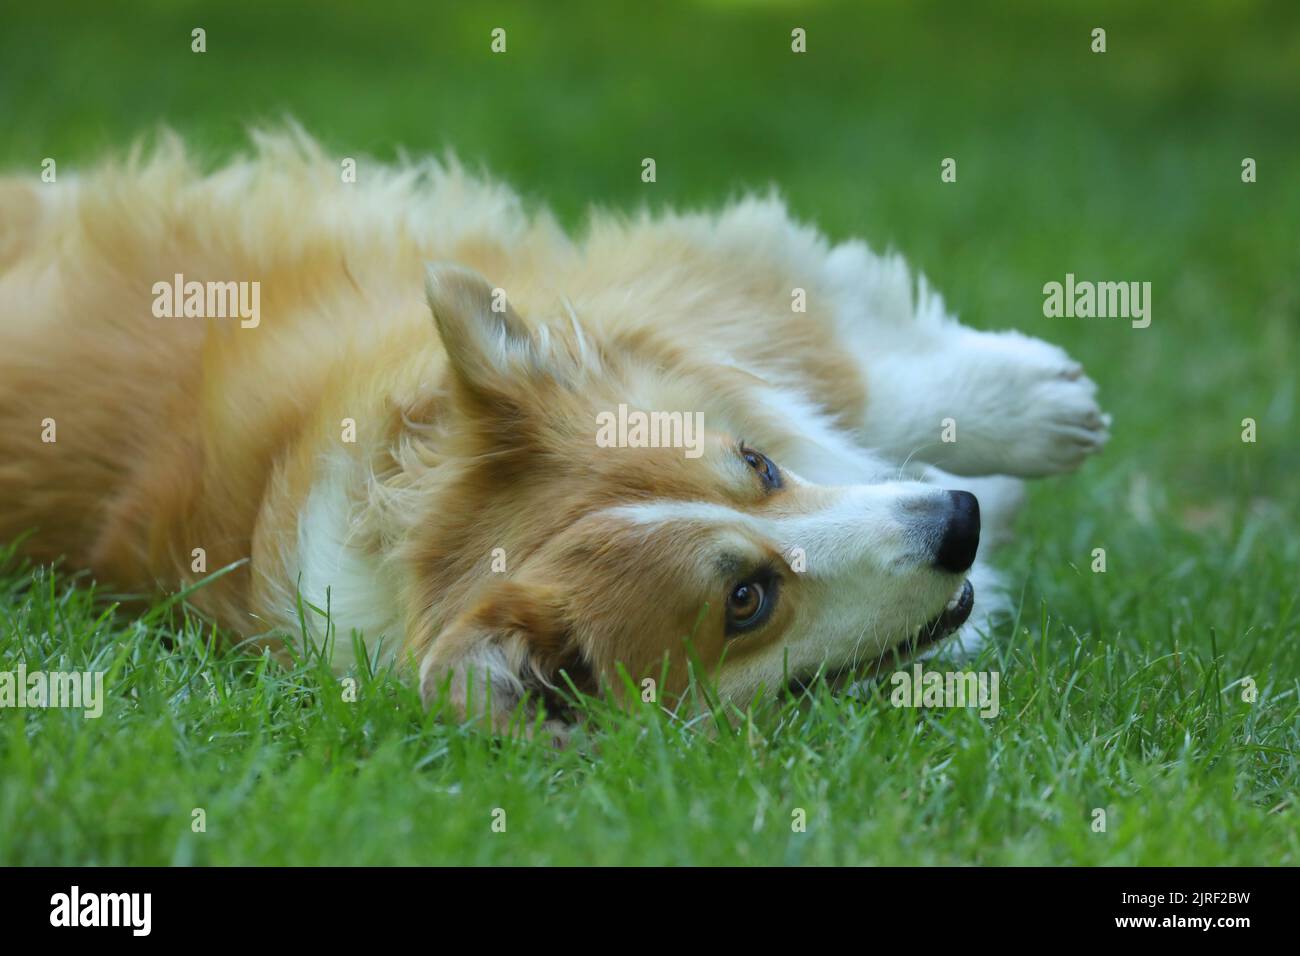 Cute Welsh Corgi Pembroke on the green grass in the park Stock Photo